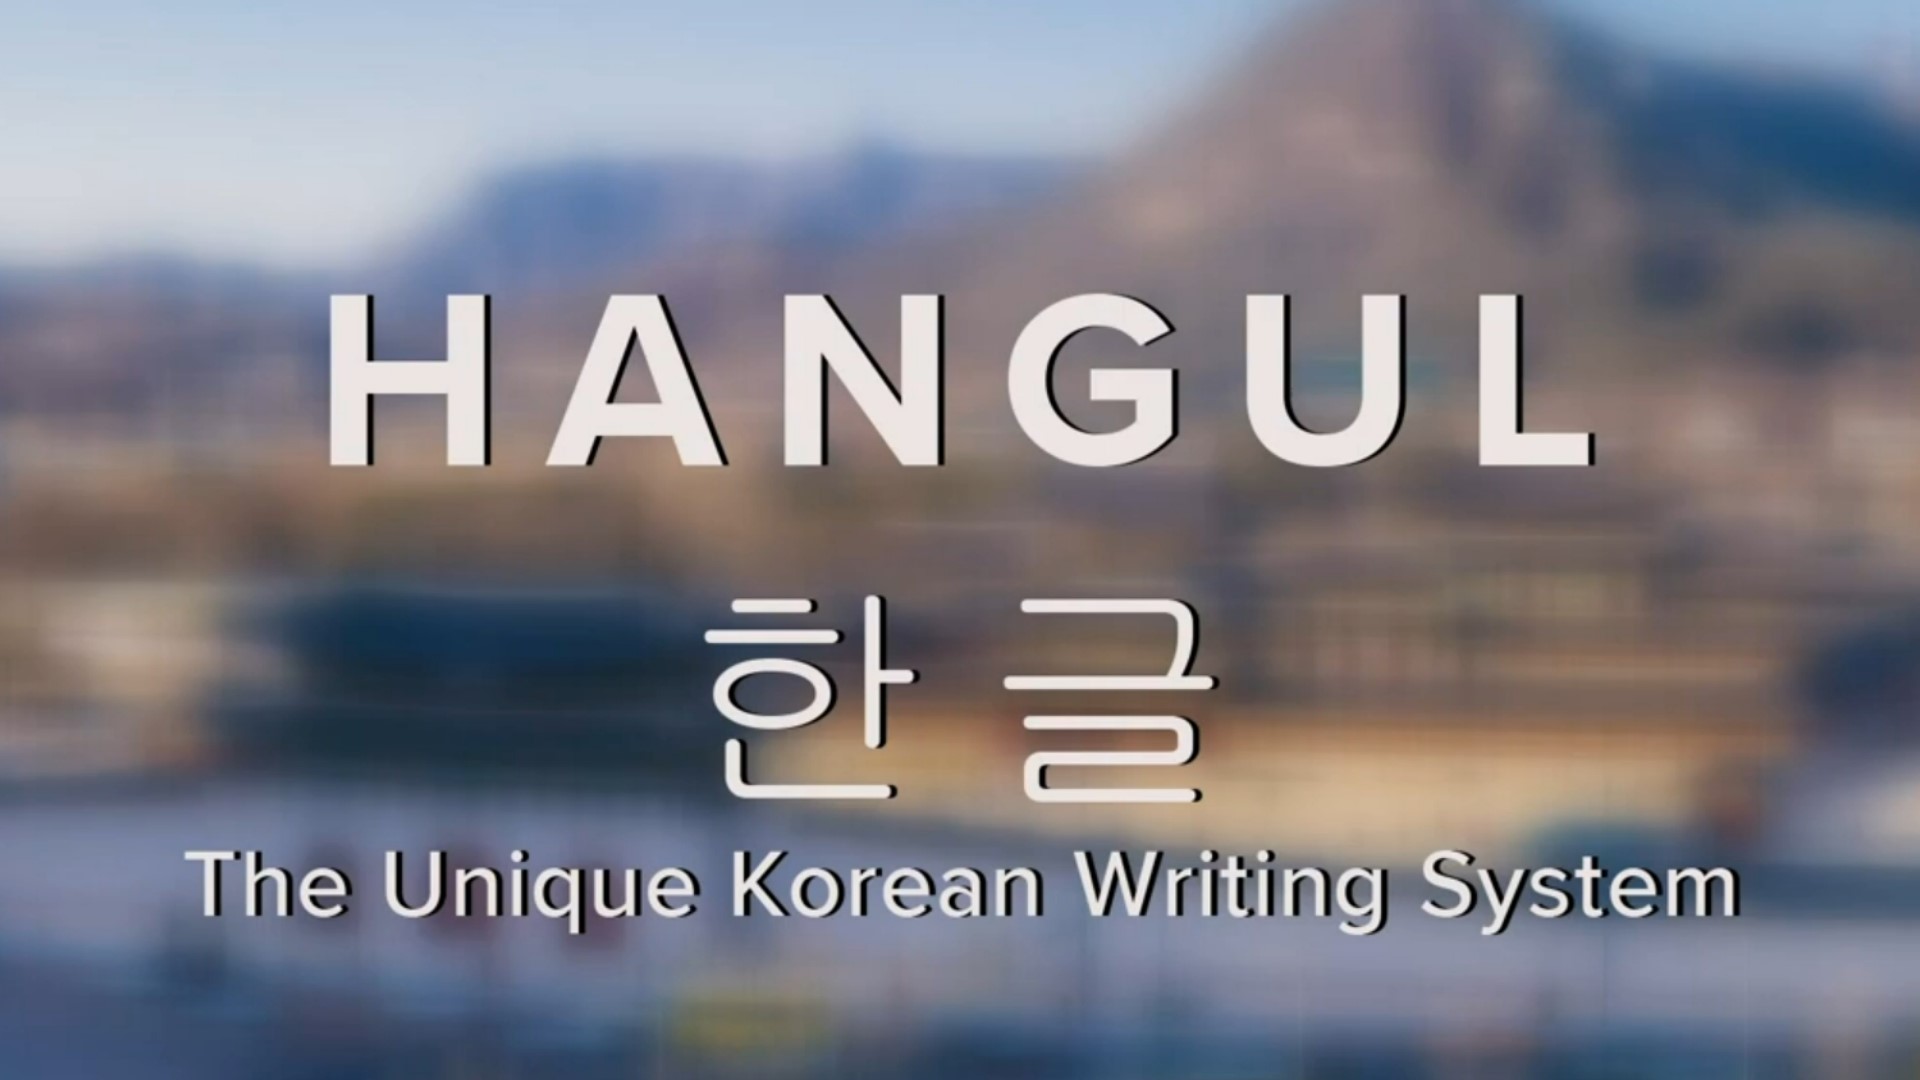 As we celebrate Asian Pacific American Heritage during May, we take a look at the unique and extremely innovative Korean writing system.
Called Hangul, King Seojong